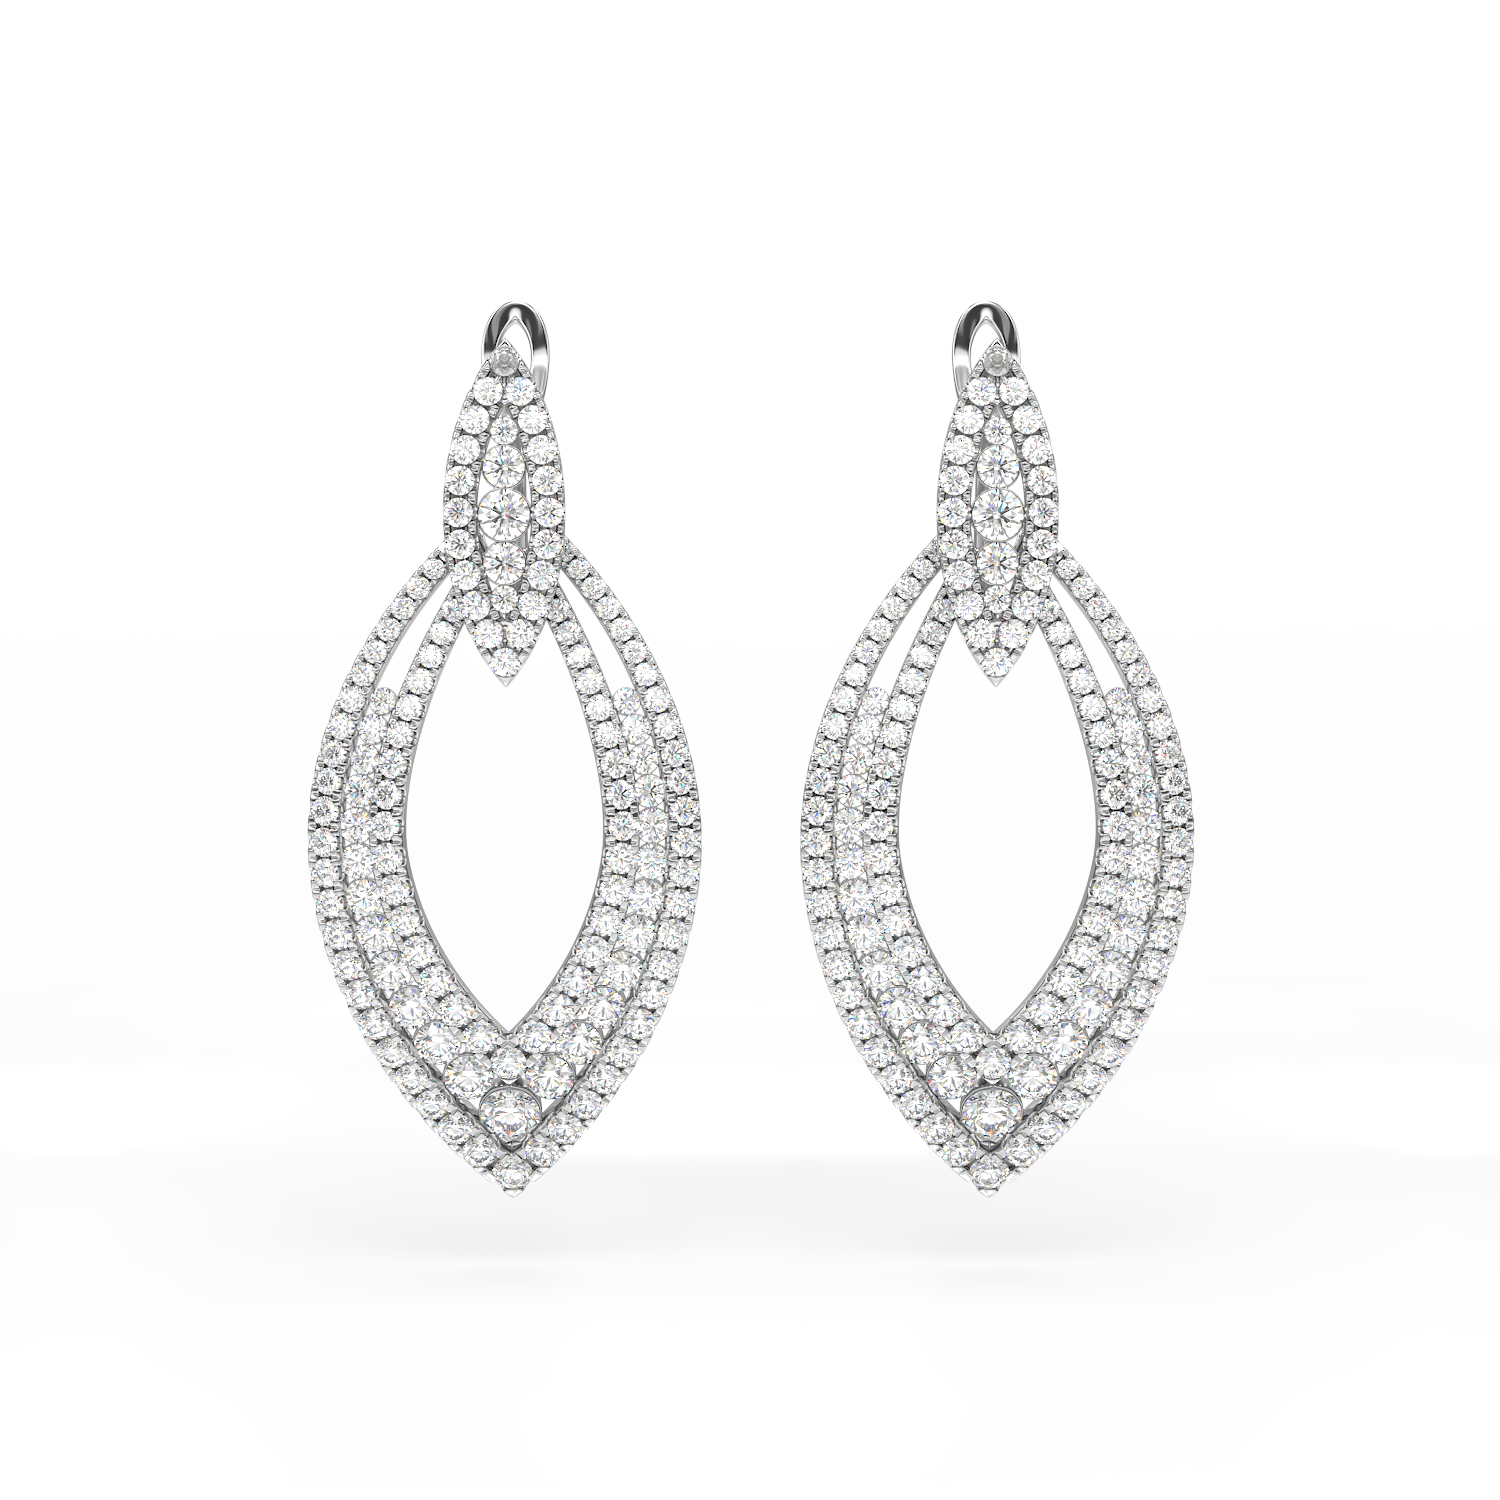 White gold earrings with 2.6ct diamonds